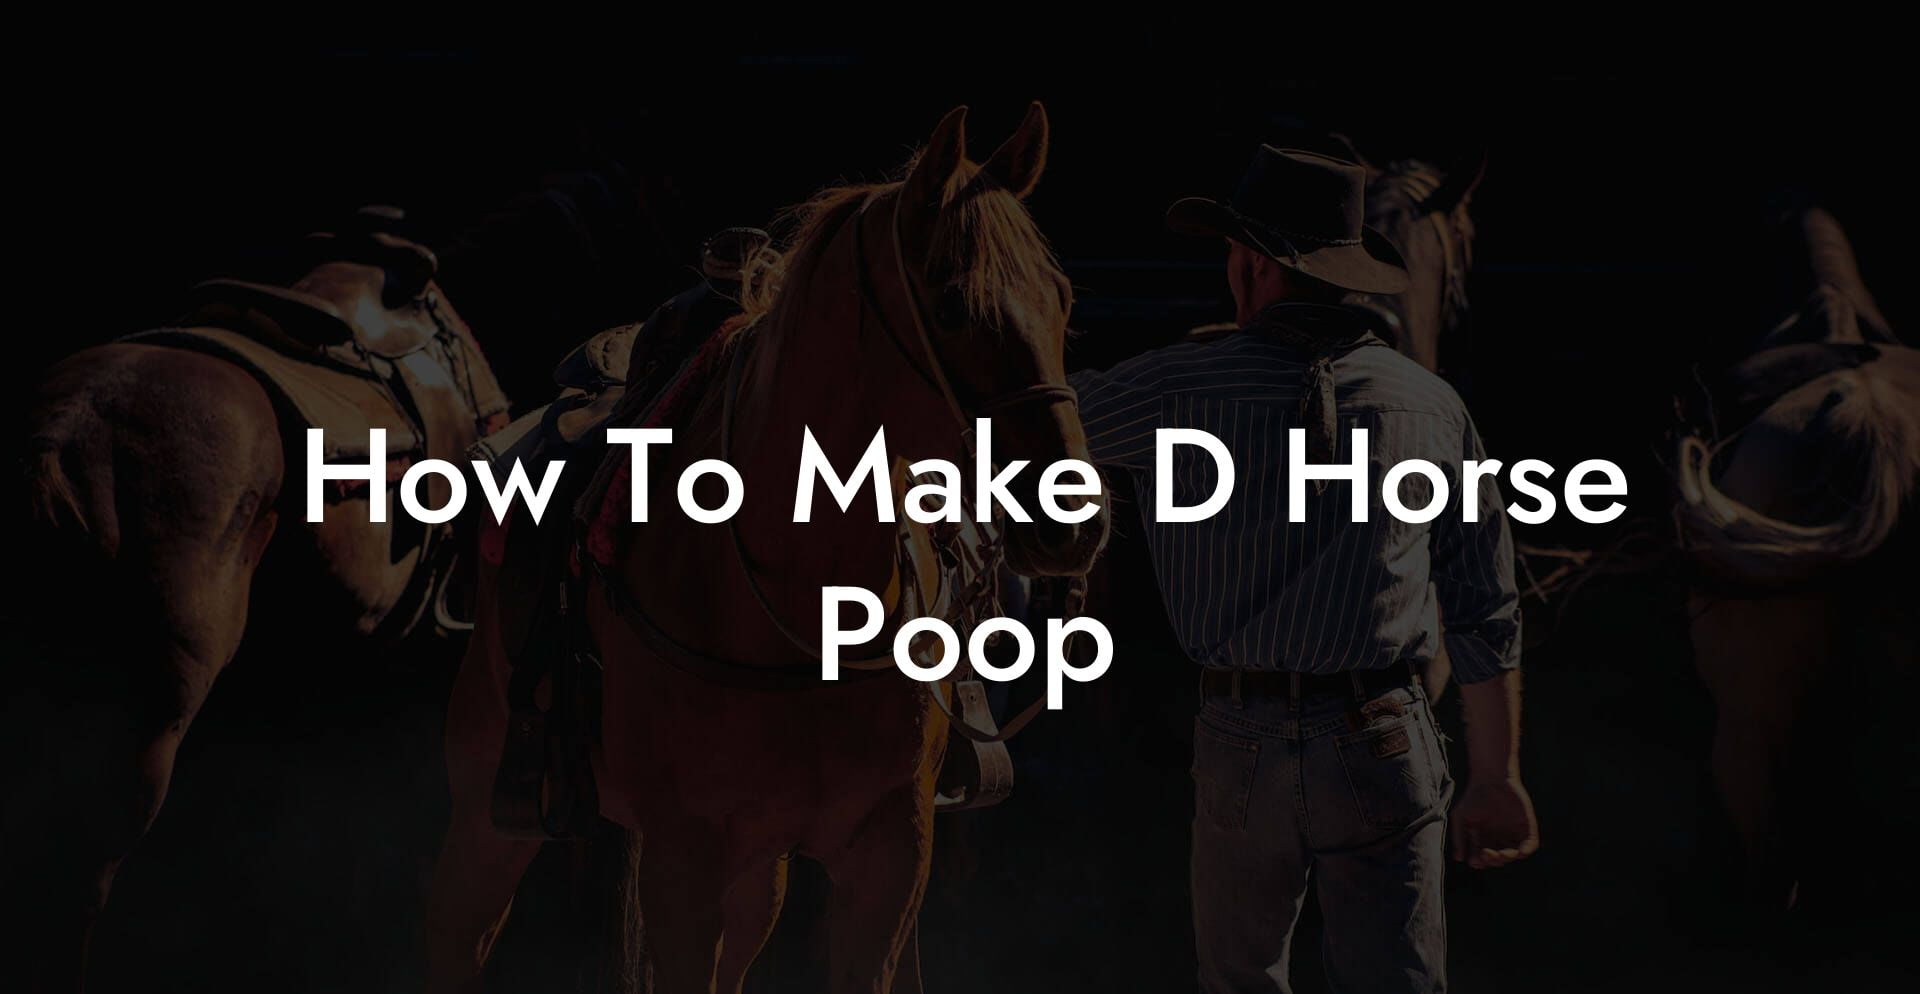 How To Make D Horse Poop